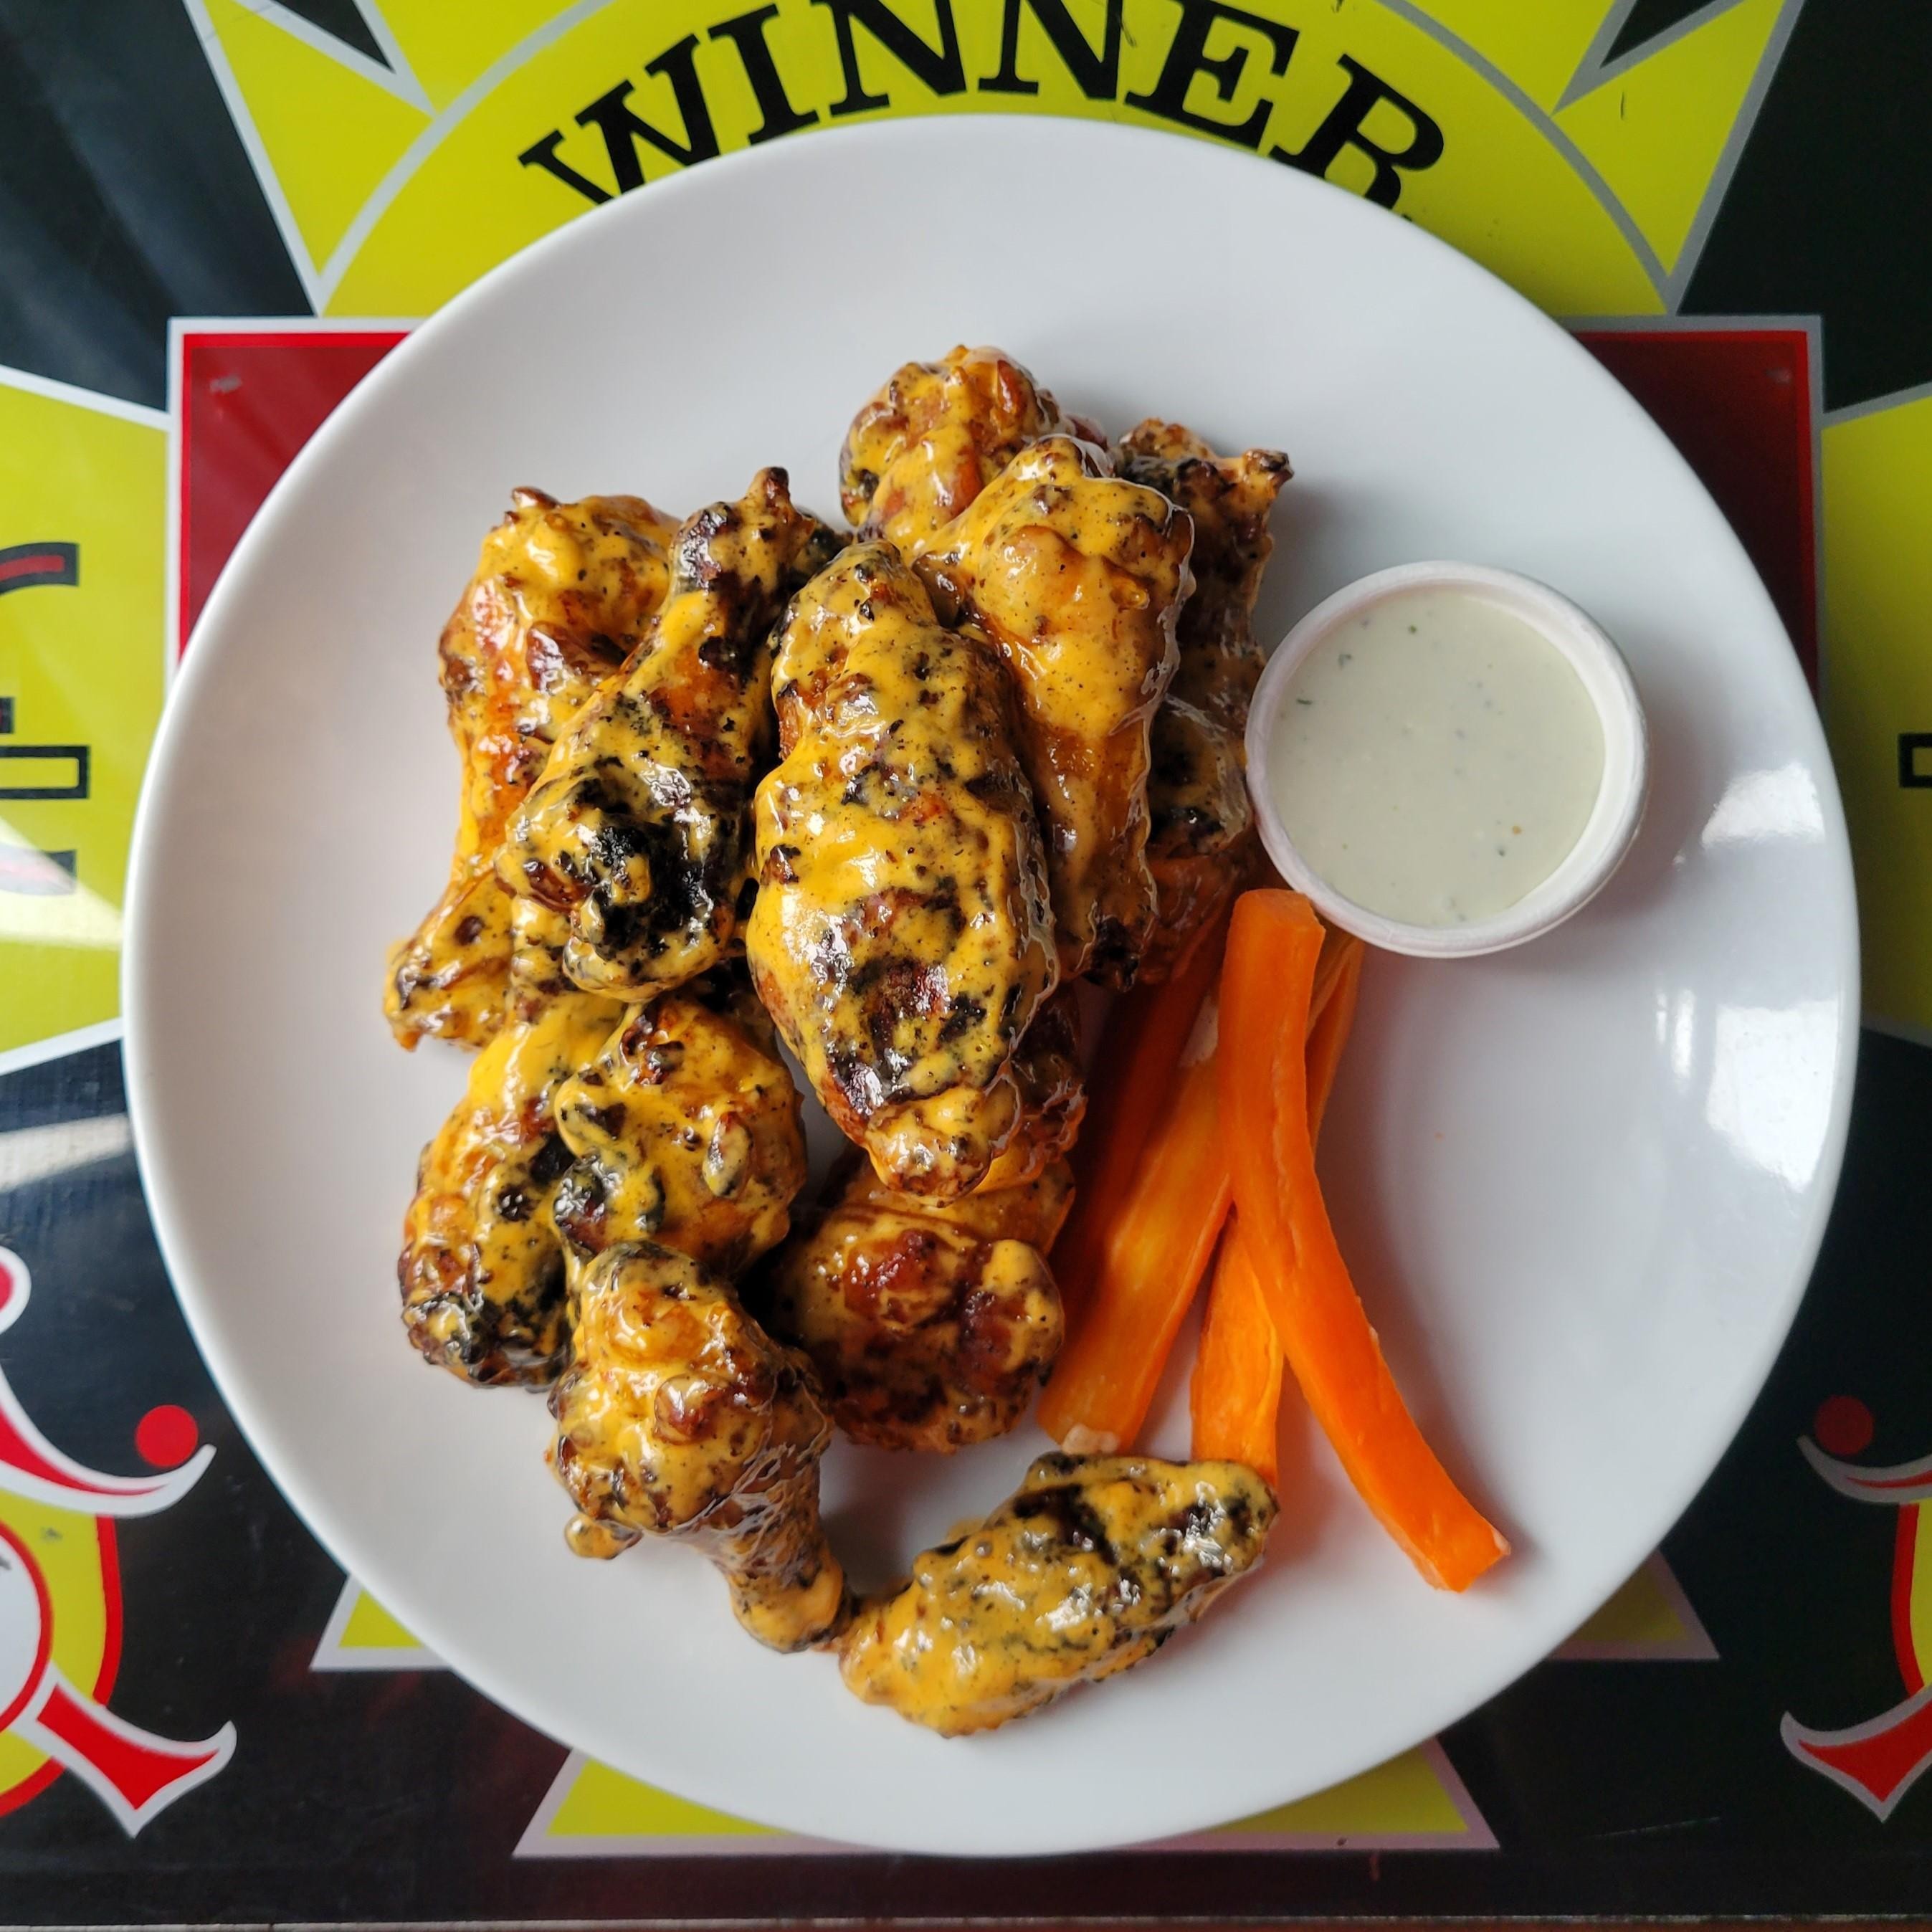 Buffalo Ranch Charred Wings (10) Fried Crispy with Carrots and Ranch or Blue Cheese